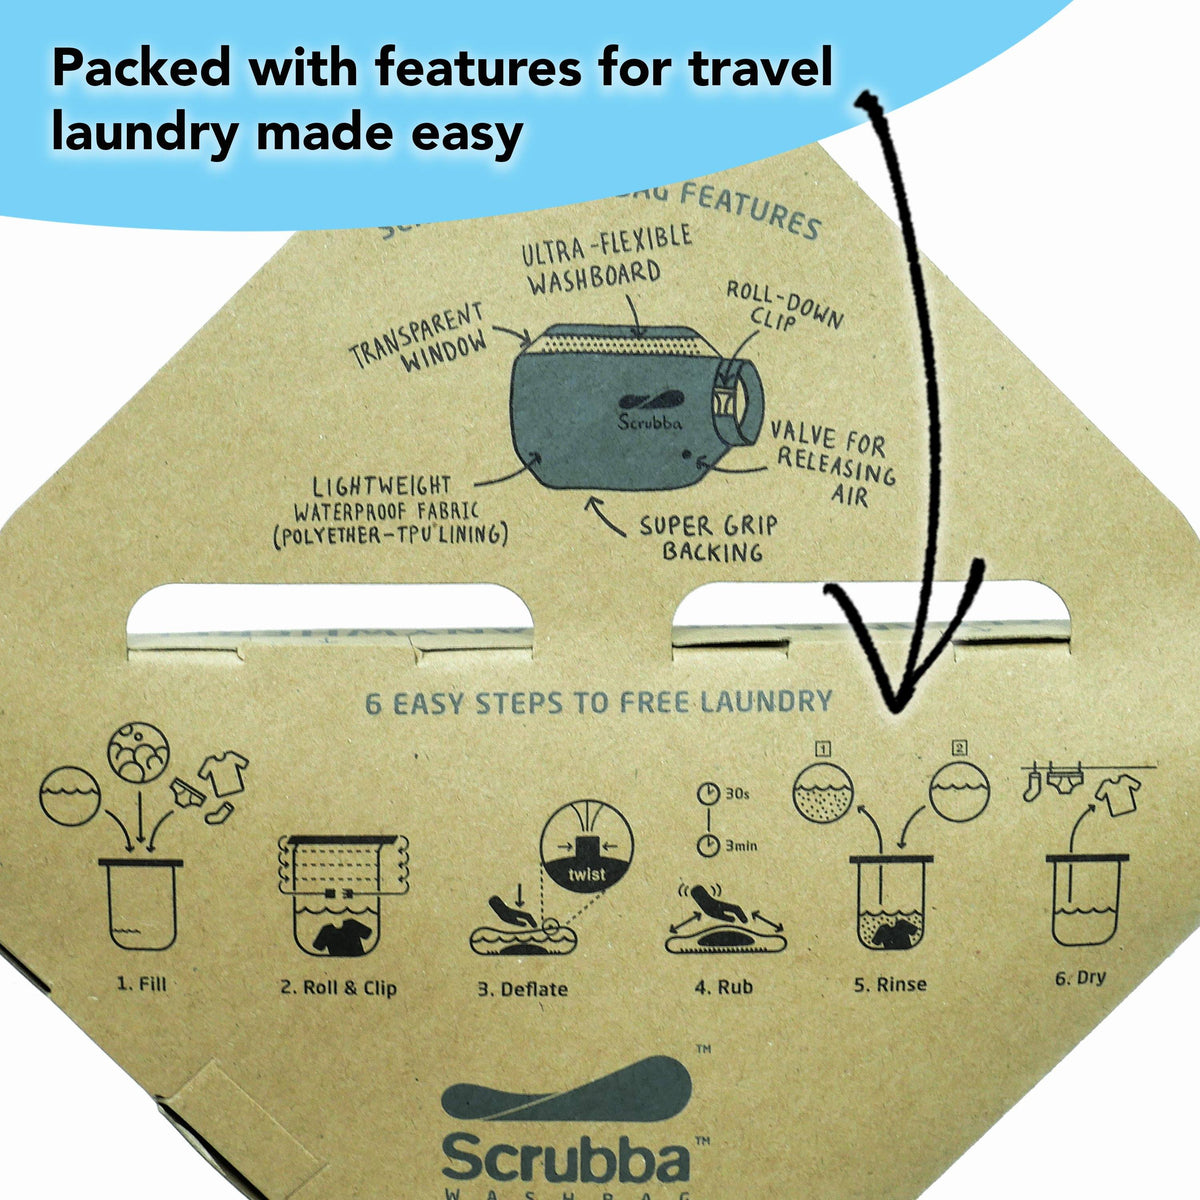  Scrubba Portable Wash Bag - Foldable Hand Washing Machine for  Hotel and Travel - Light and Small Eco-Friendly Camping Laundry Bag for  Washing Clothes Anywhere, 6.3 inch x 2.4 inch x